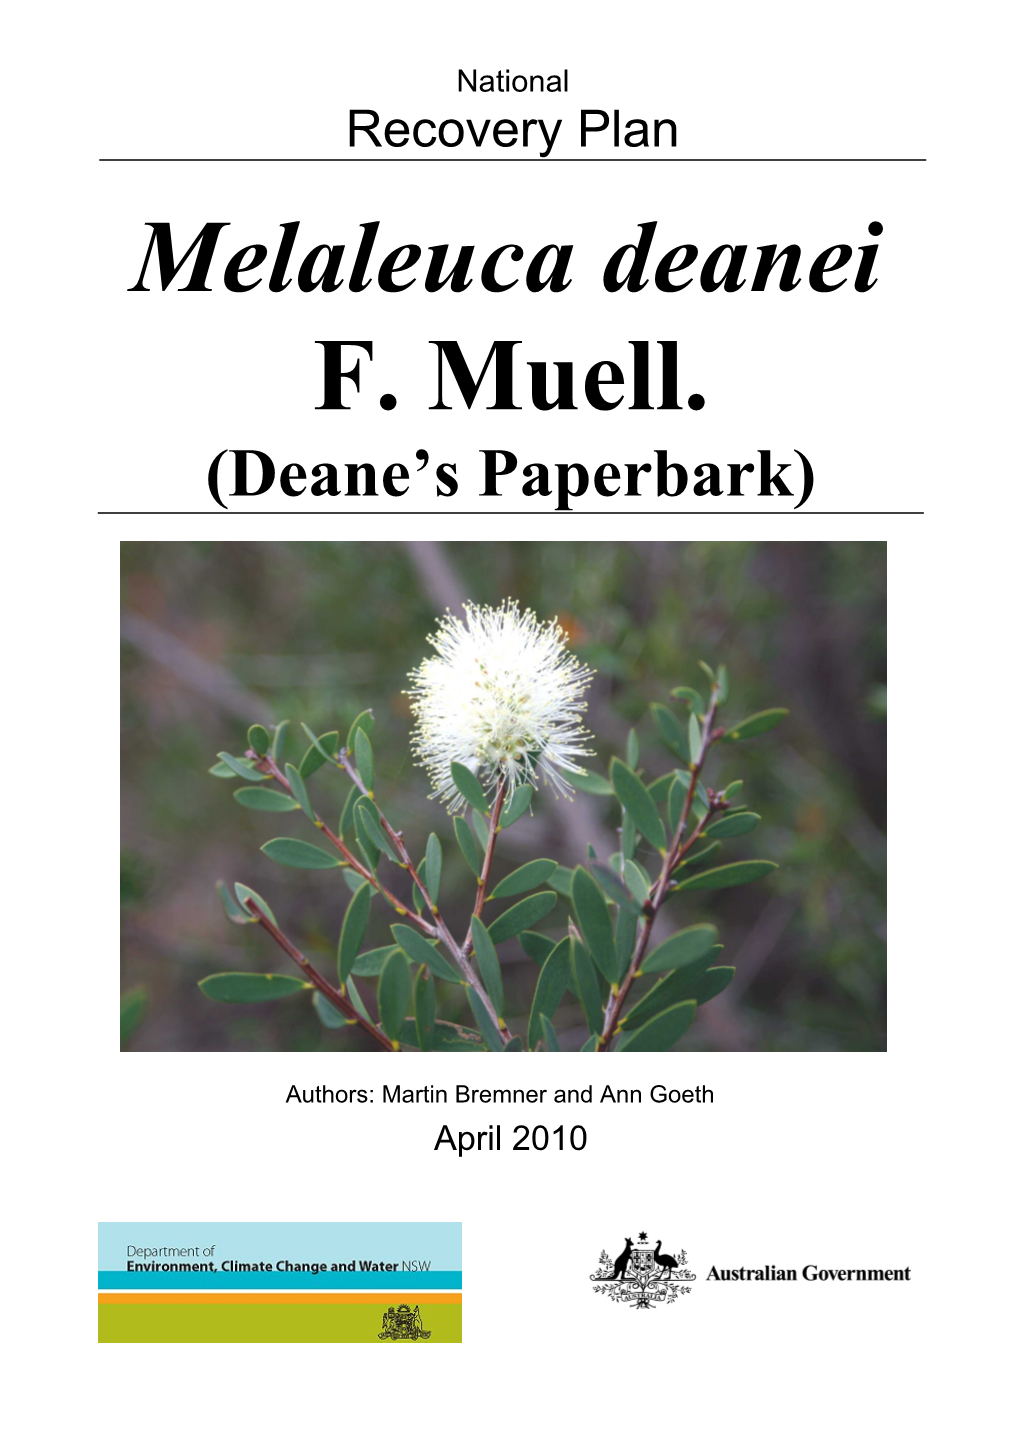 National Recovery Plan for Deane's Paperbark (Melaleuca Deanei) Adopted 280710